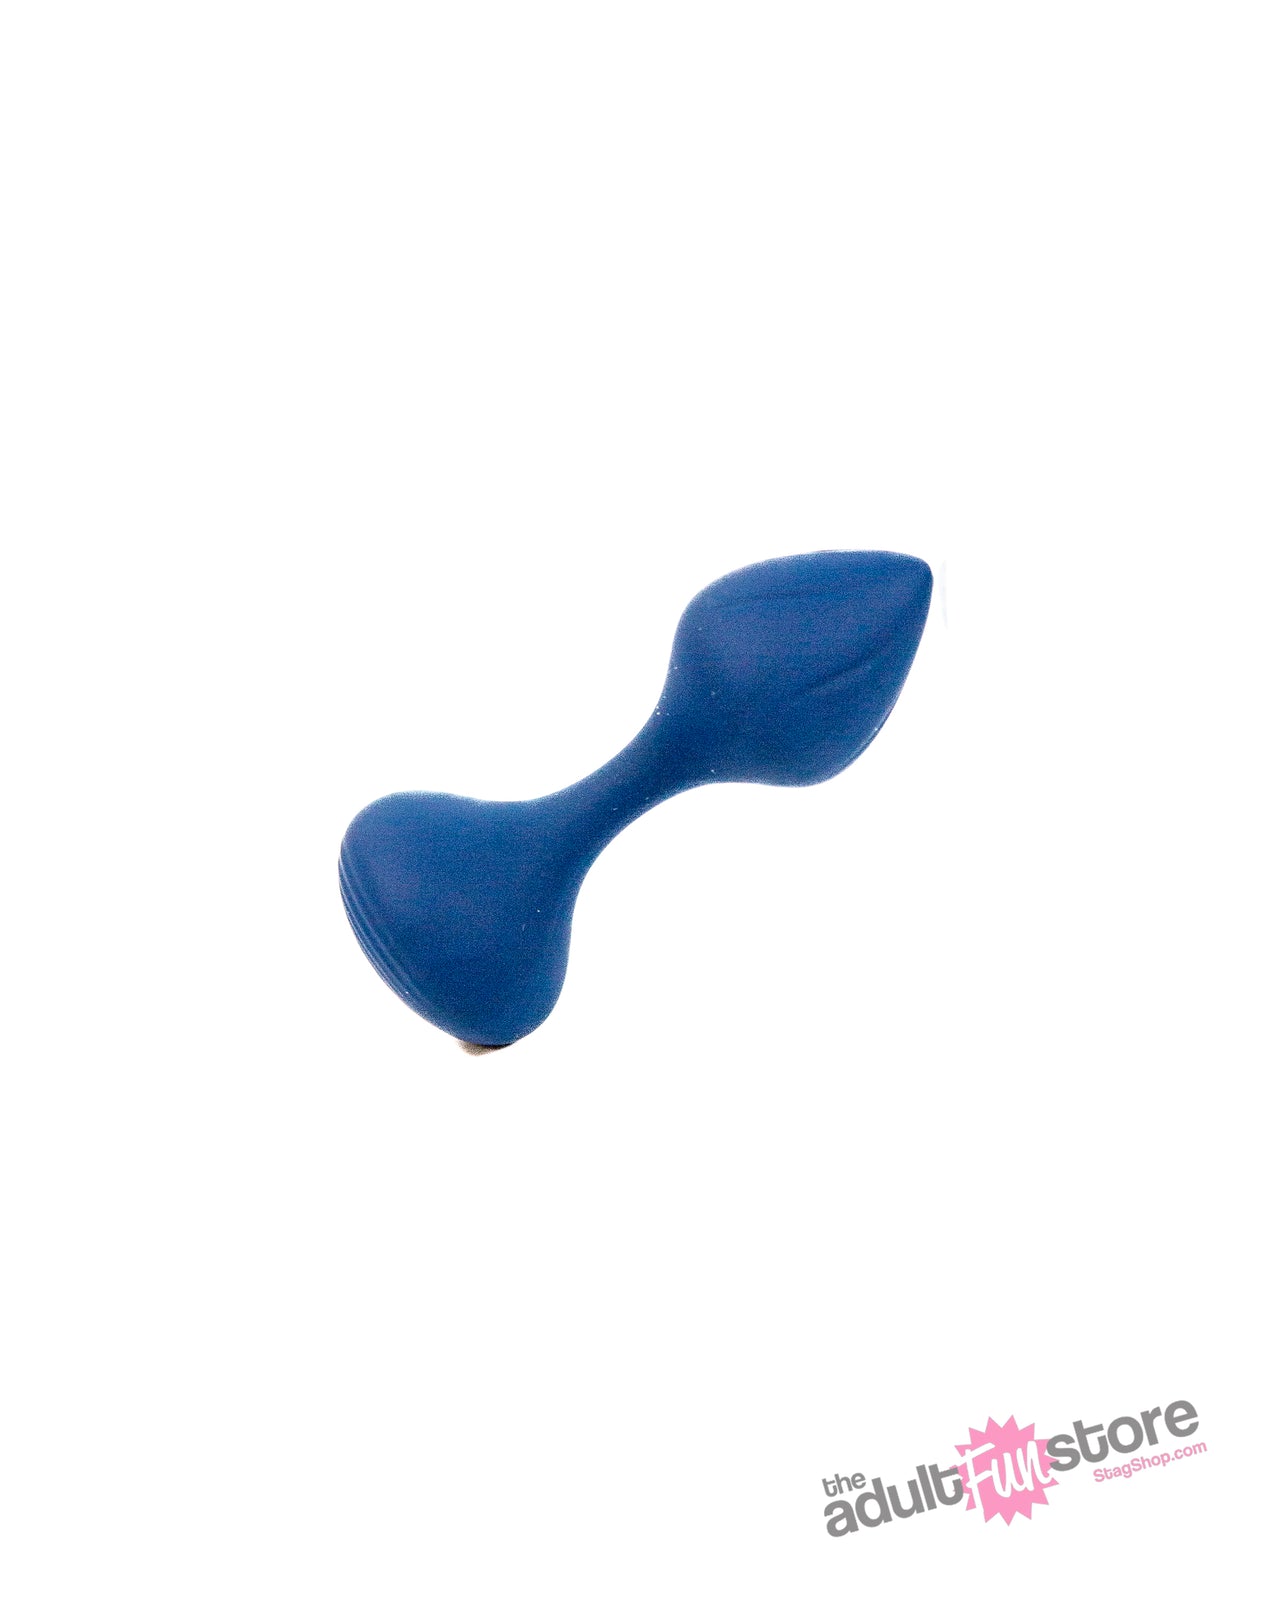 Playboy - Tail Trainer Silicone Anal Trainer Kit - Blue - Stag Shop